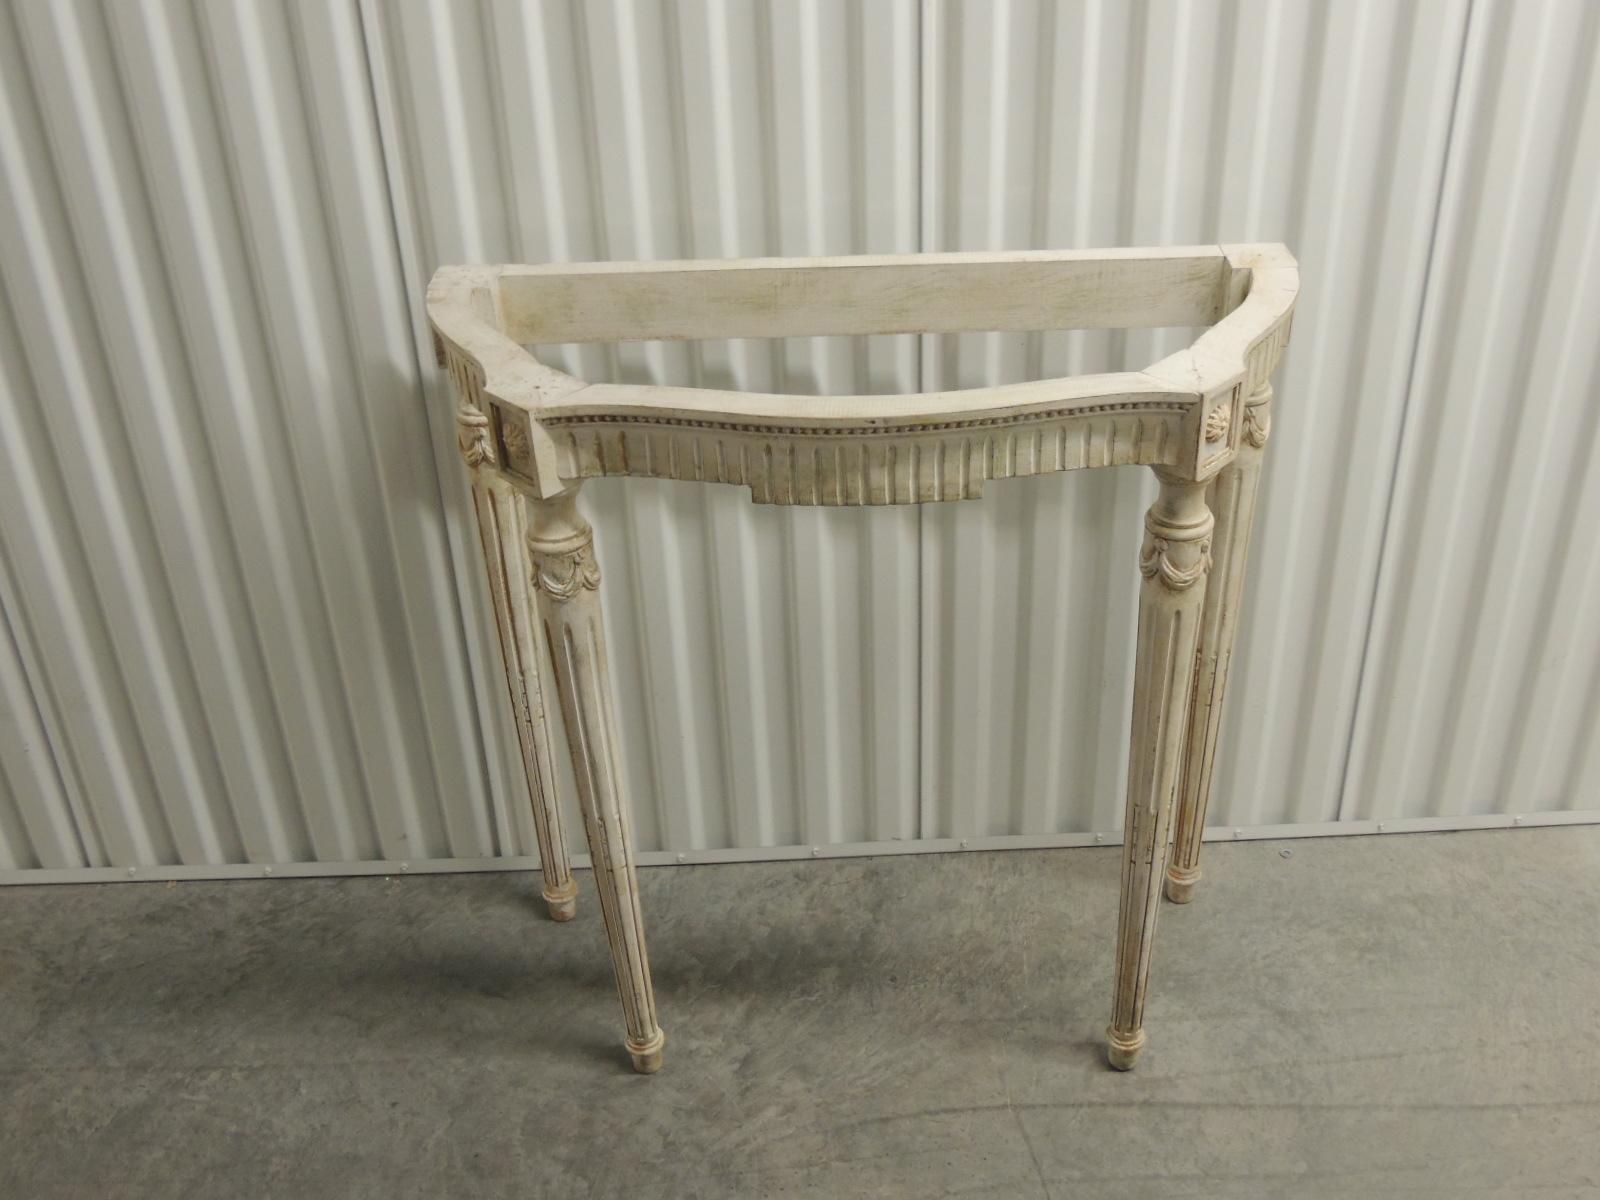 Painted White Vintage Louis XVI Style Console Table Frame 2